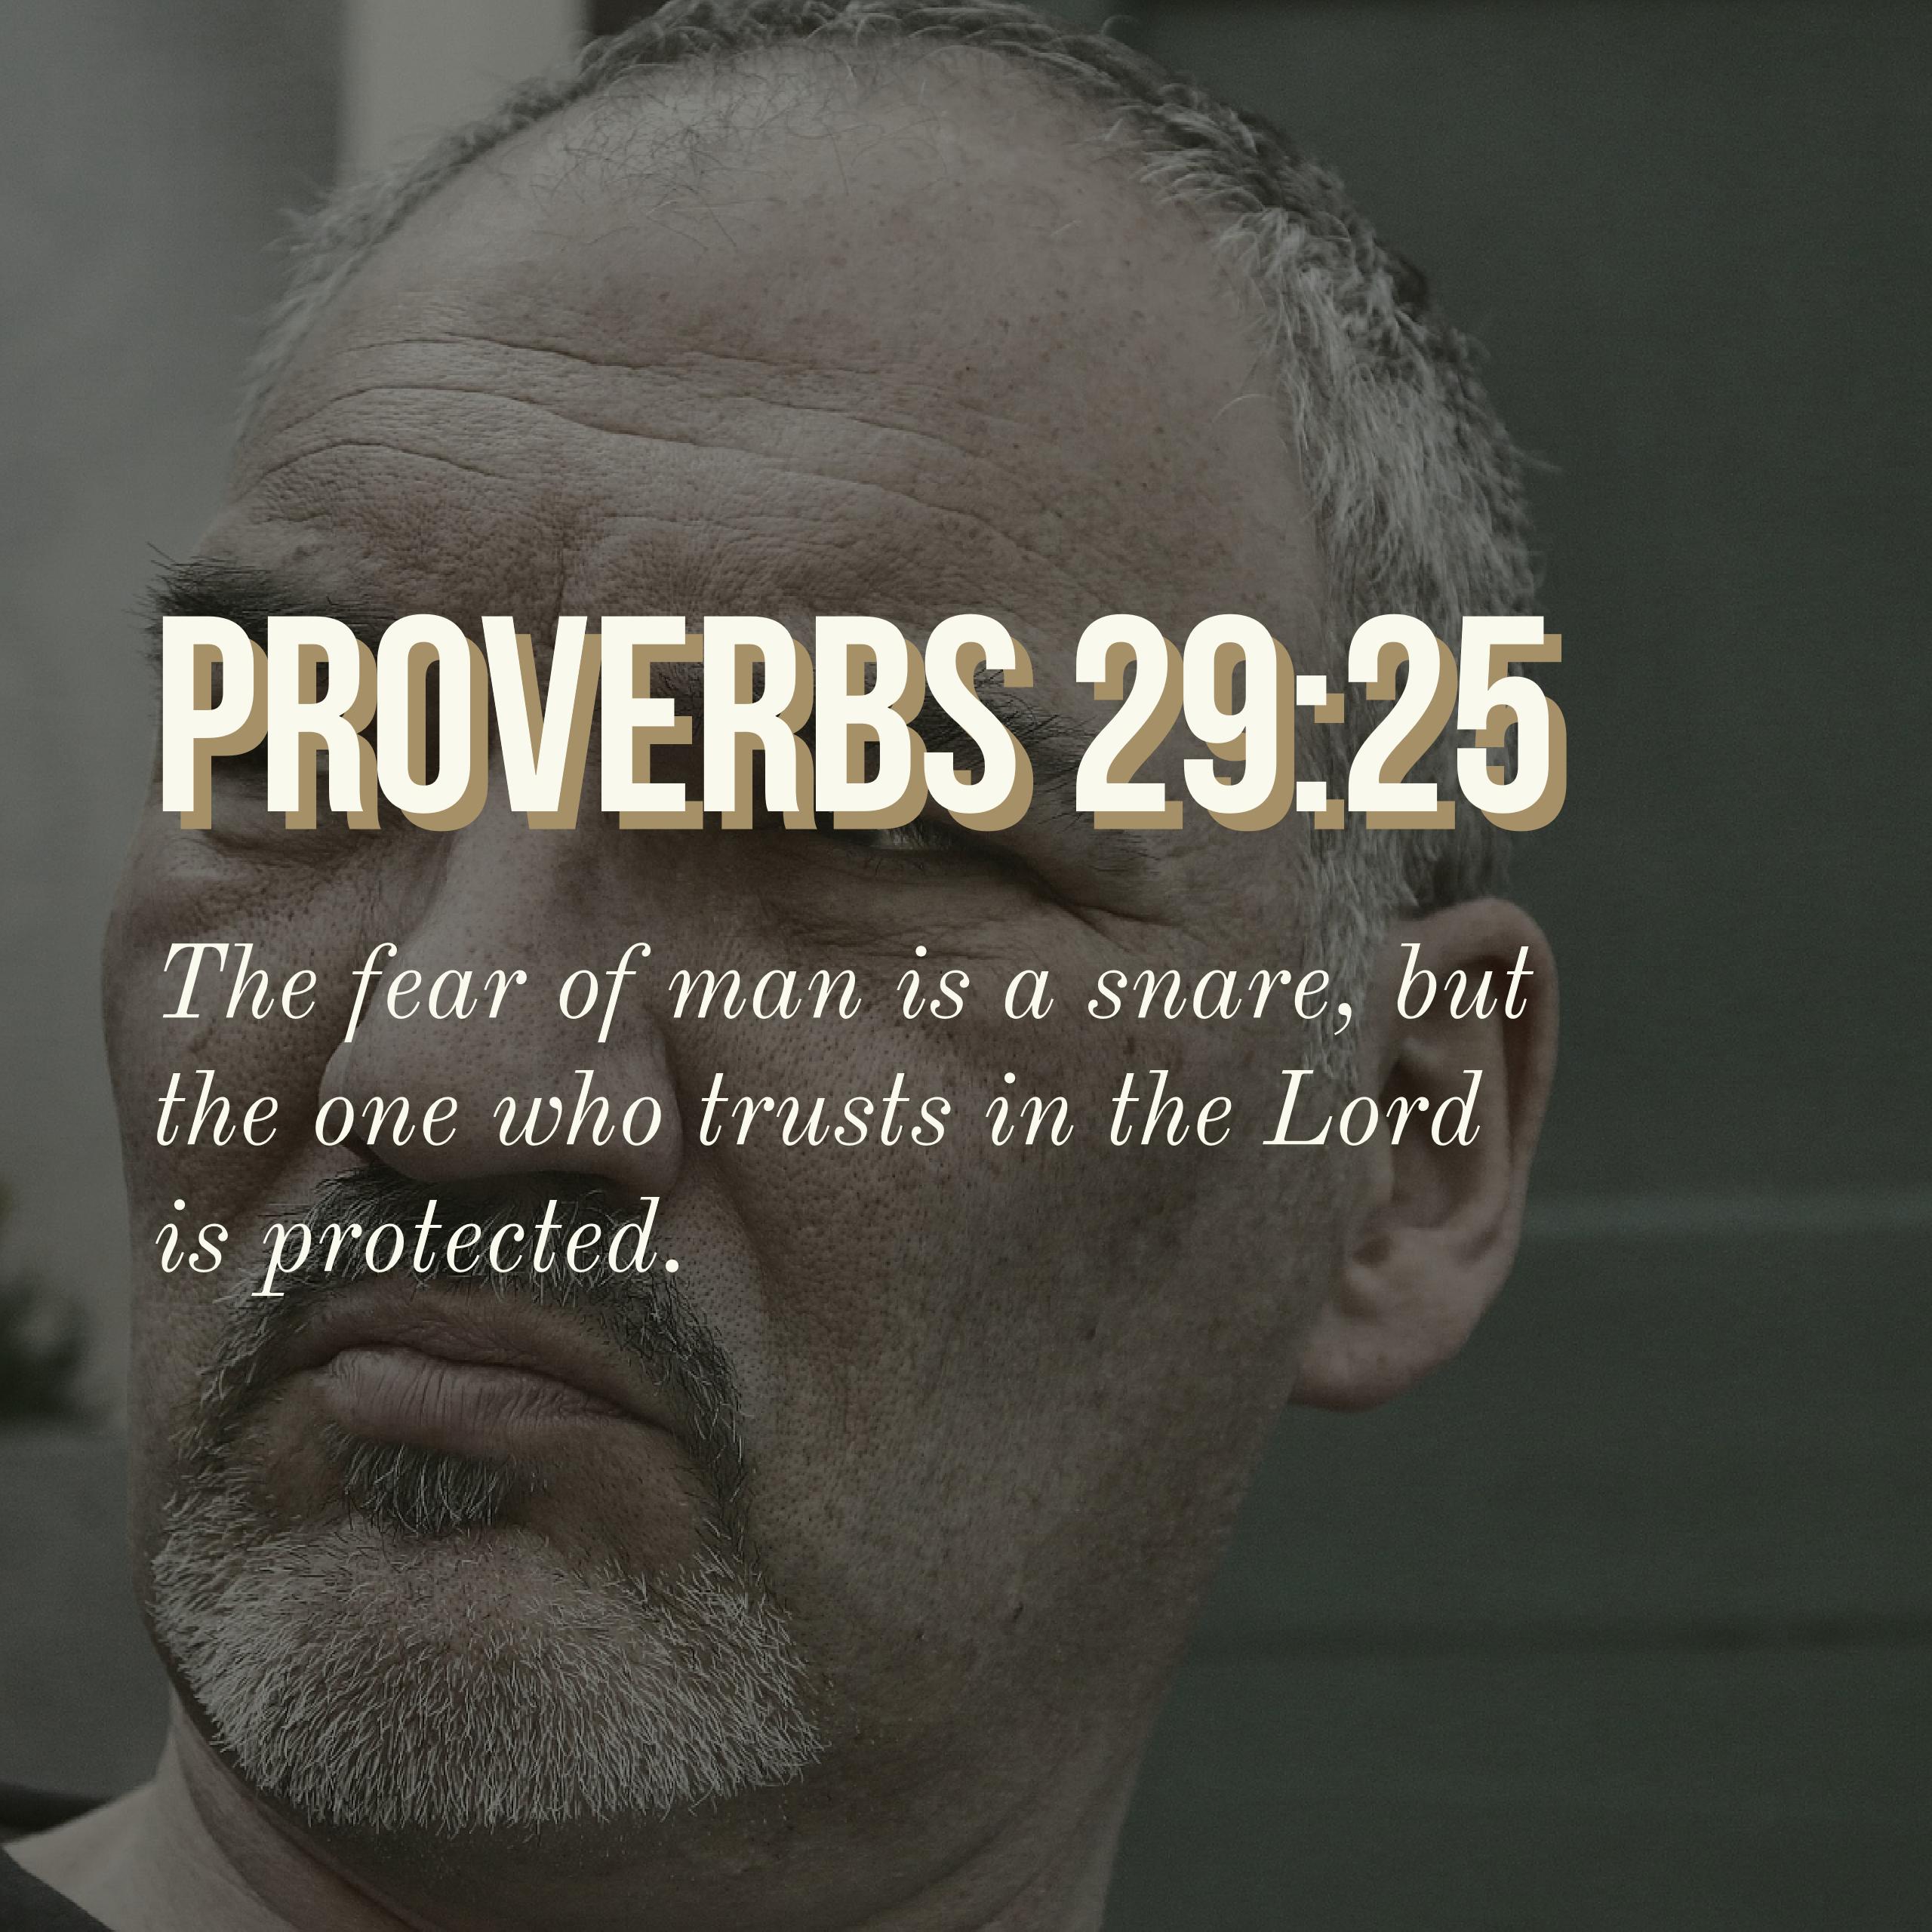 Fearing Man Over God